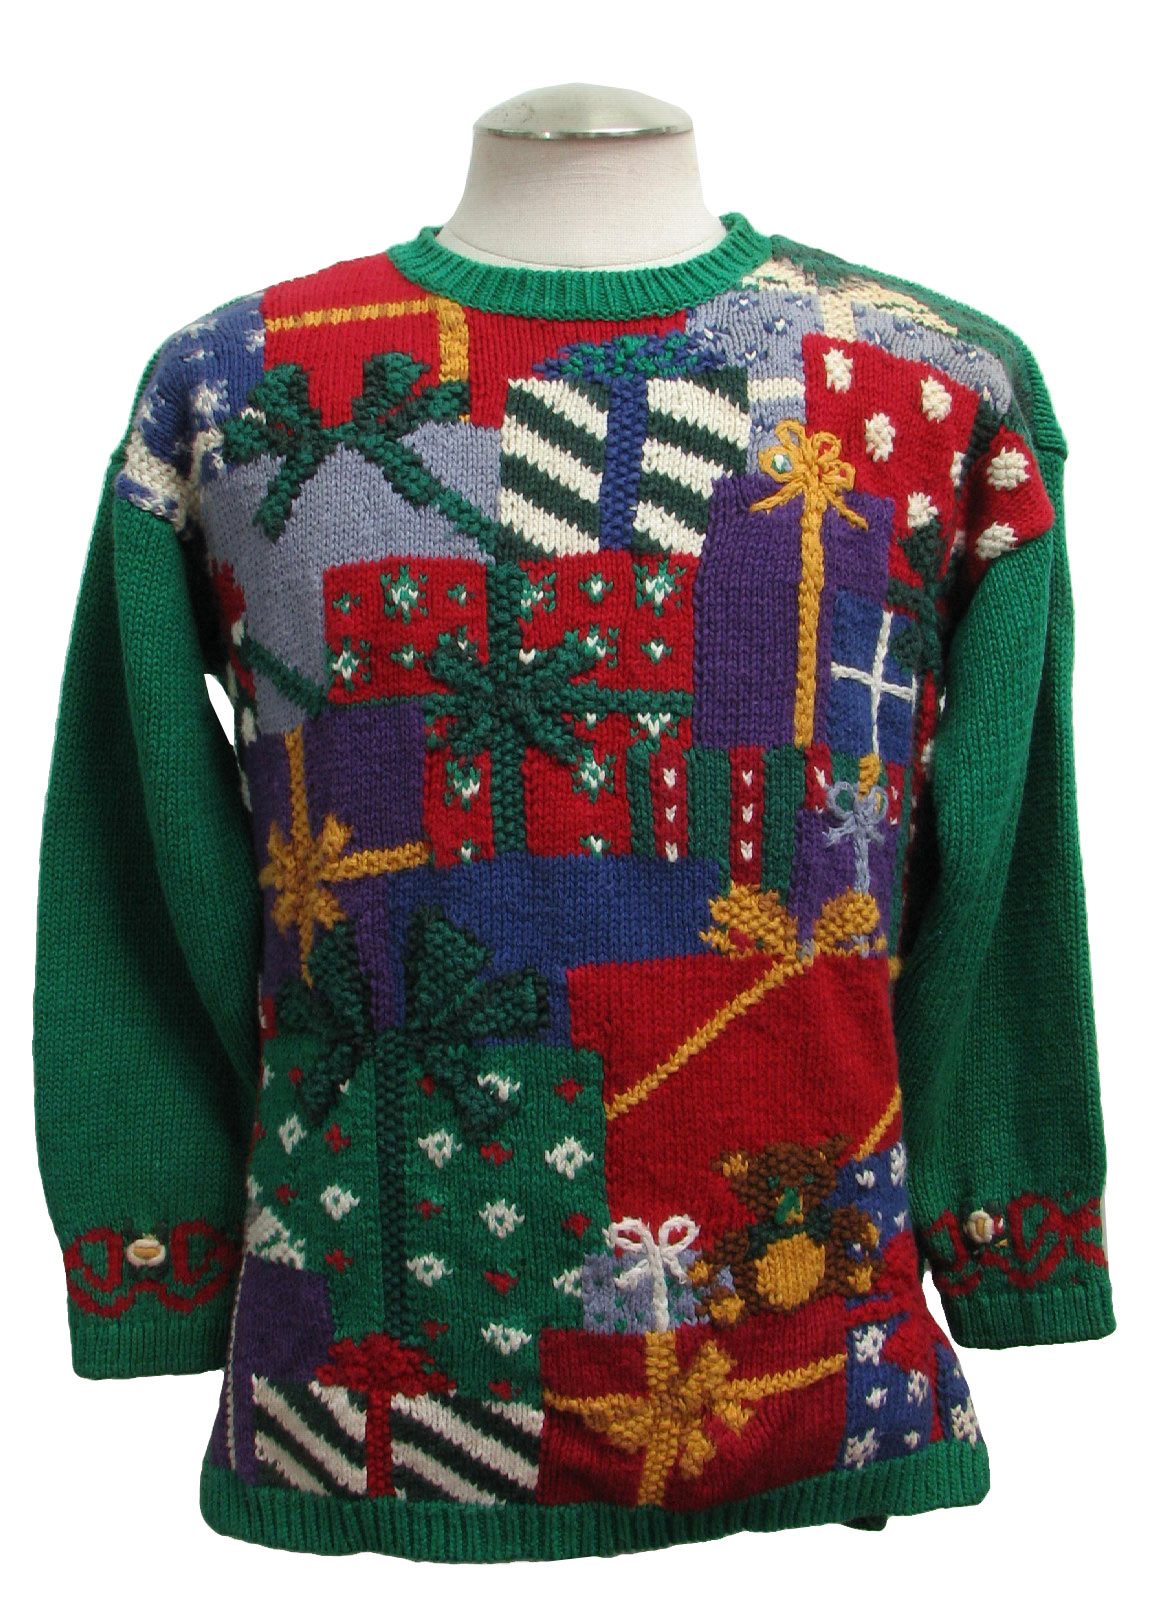 Ugliest of the Ugly Christmas Sweater: -Signatures-, Unisex green ...